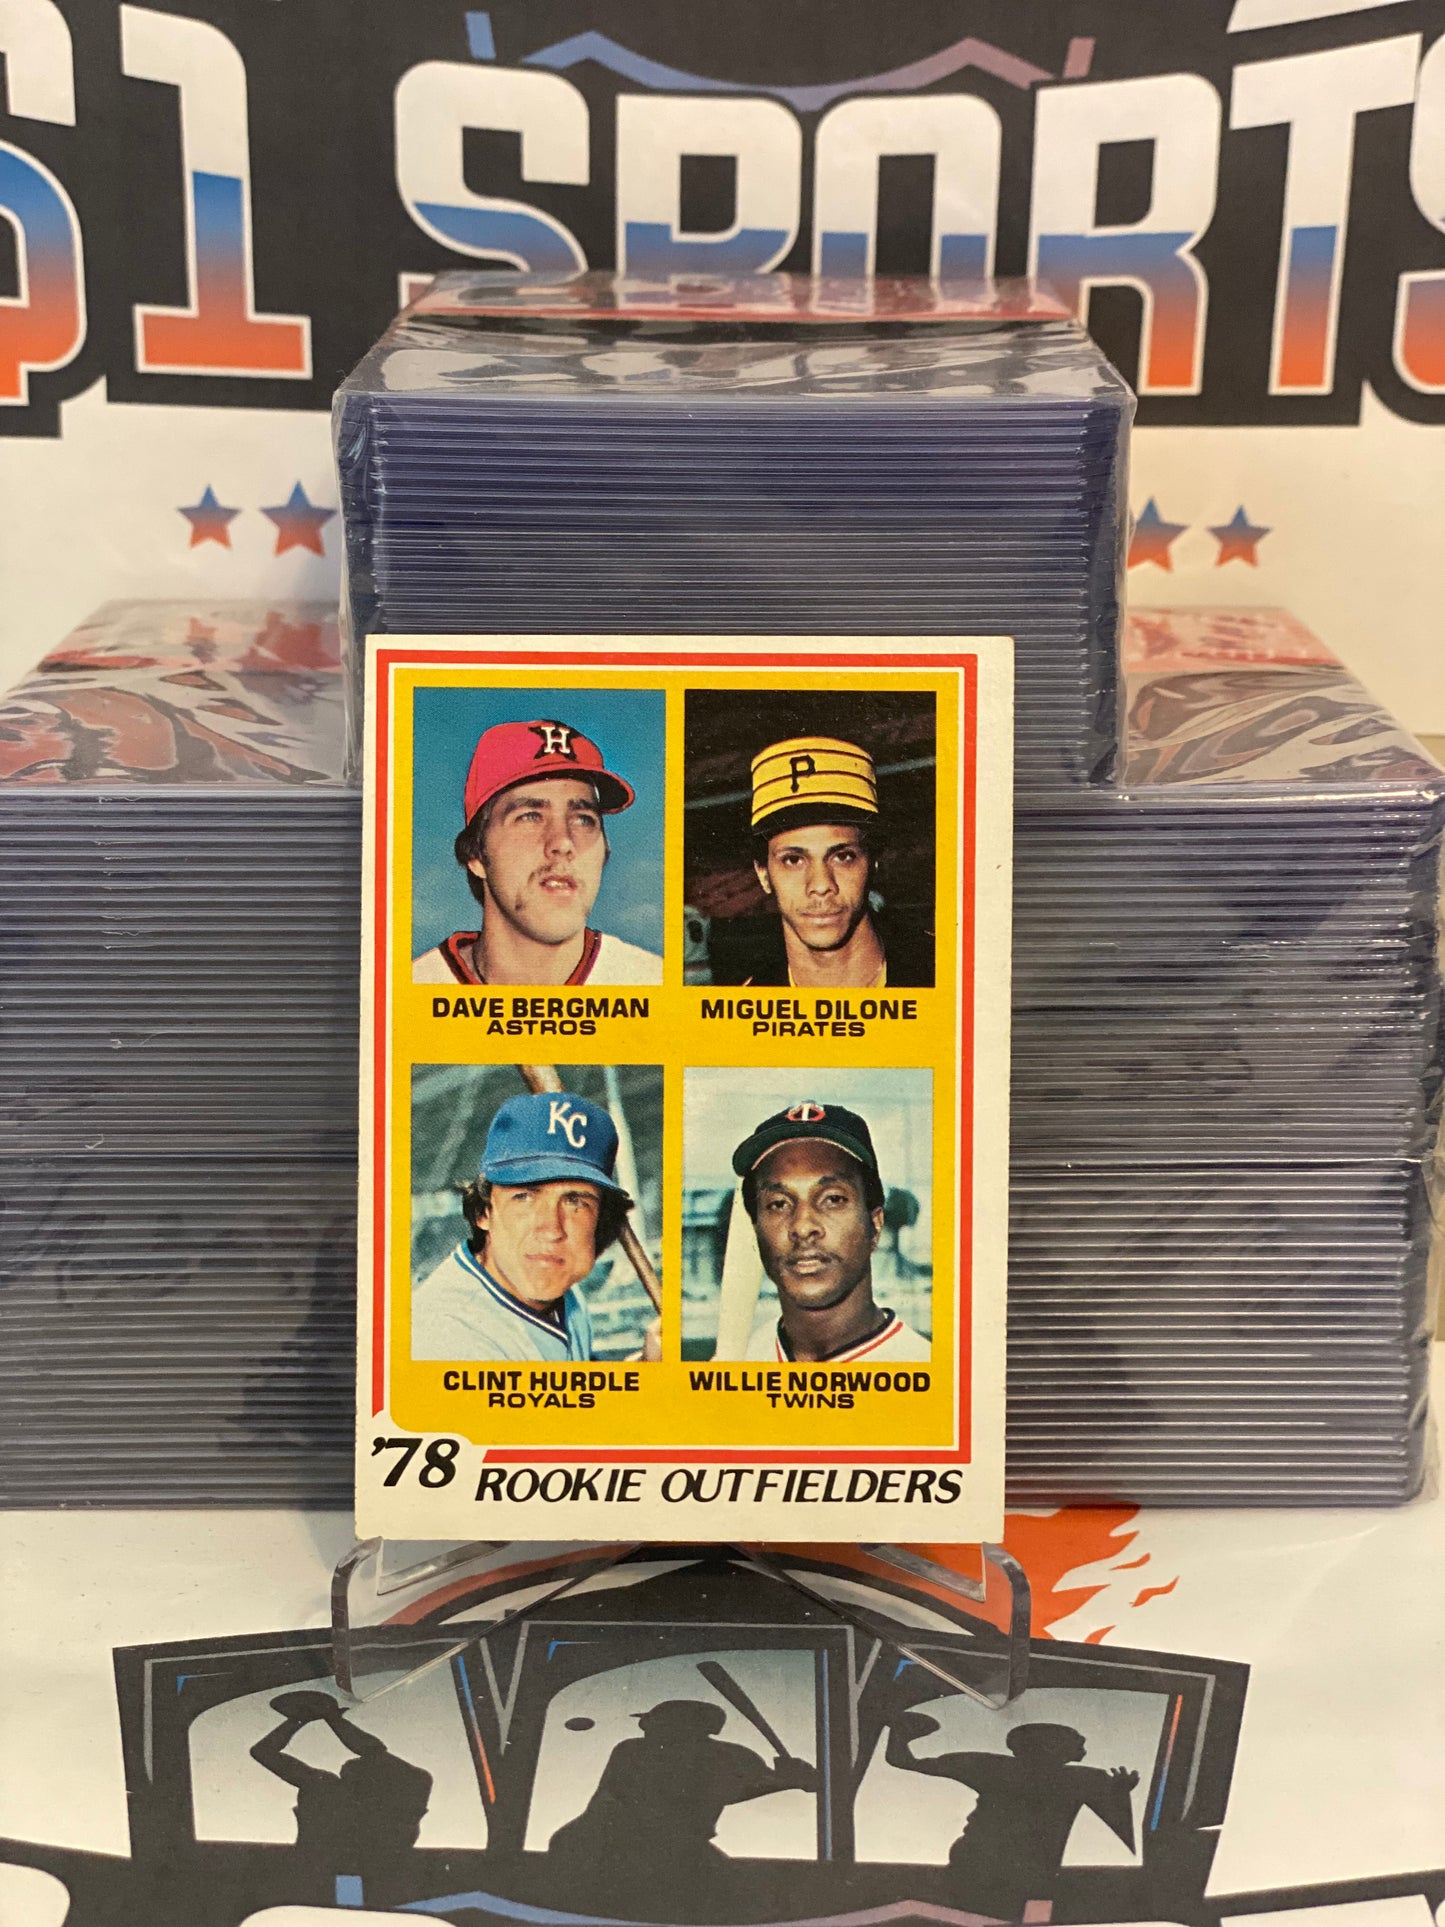 1978 Topps (Rookie Outfielders) Dave Bergman, Miguel Dilone, Clint Hurdle, Willie Norwood #705